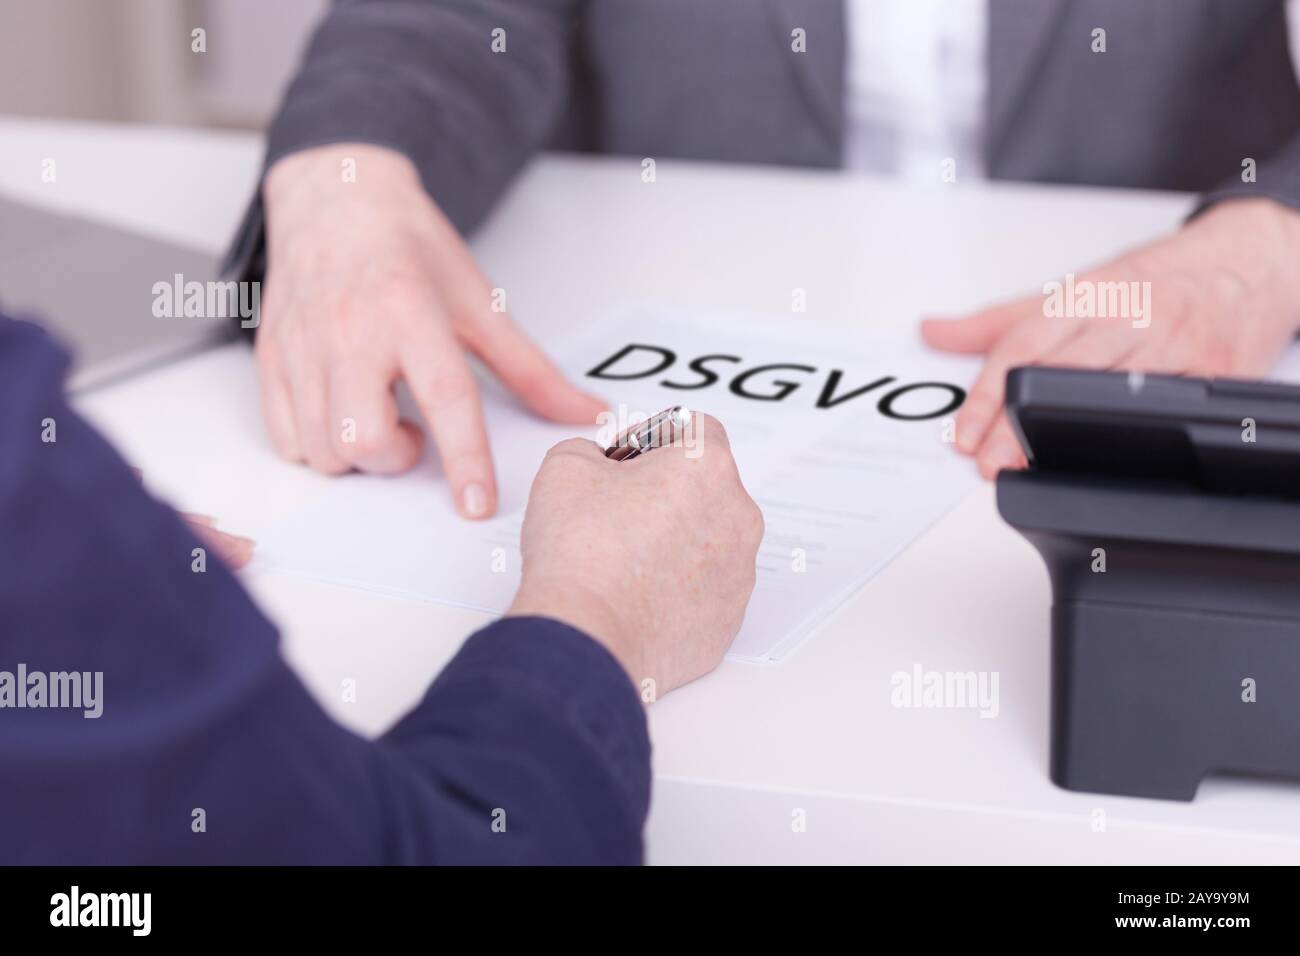 Two women at the office. Concept for signing a contract concerning DSGVO. Stock Photo